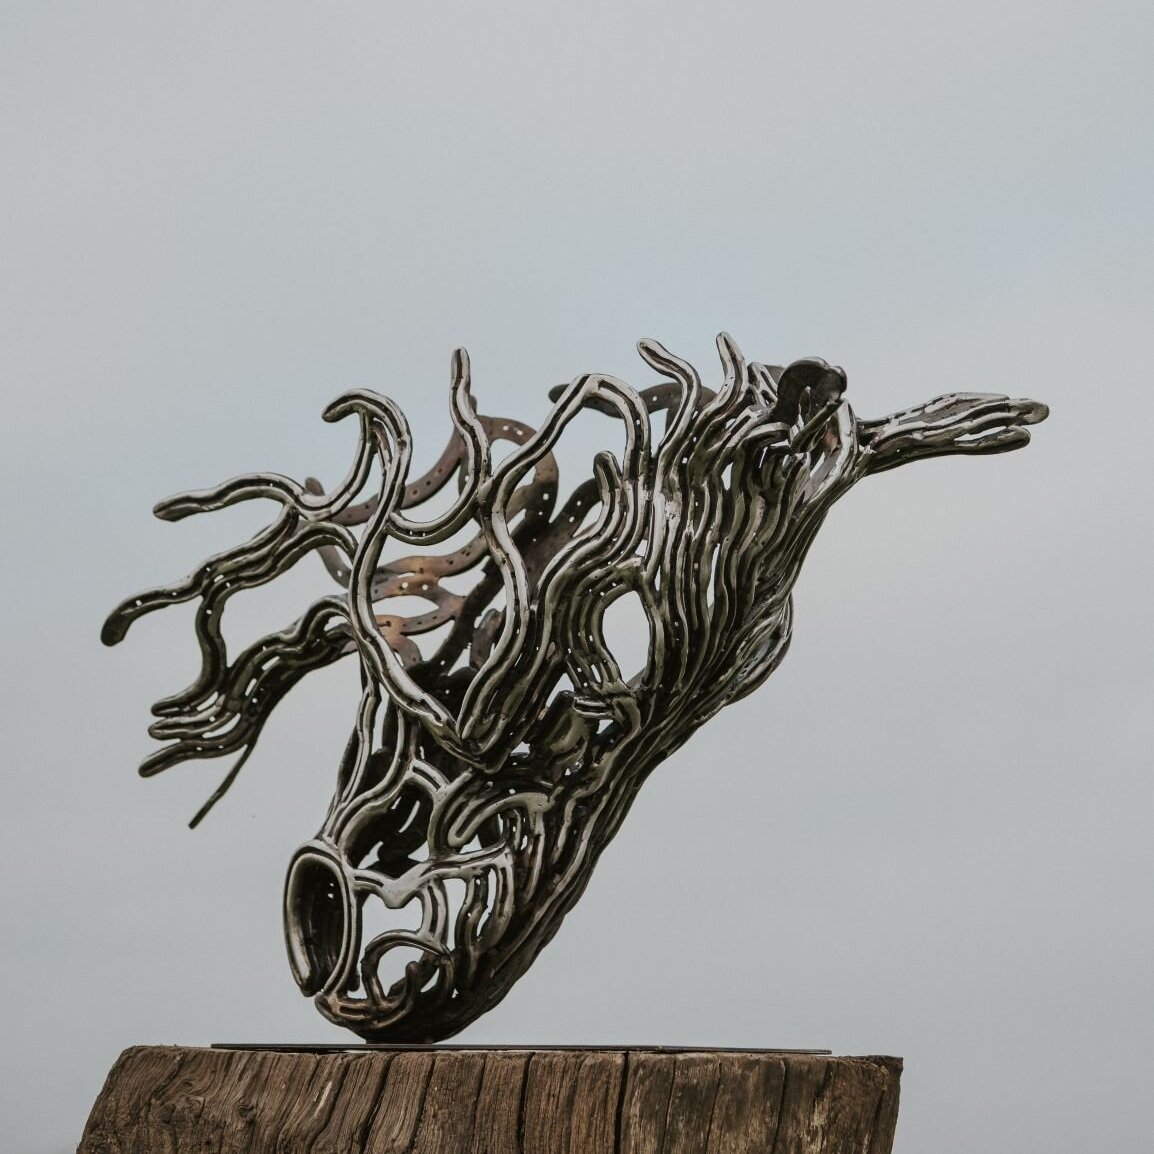 Steel Horse sculpture made from horseshoes,